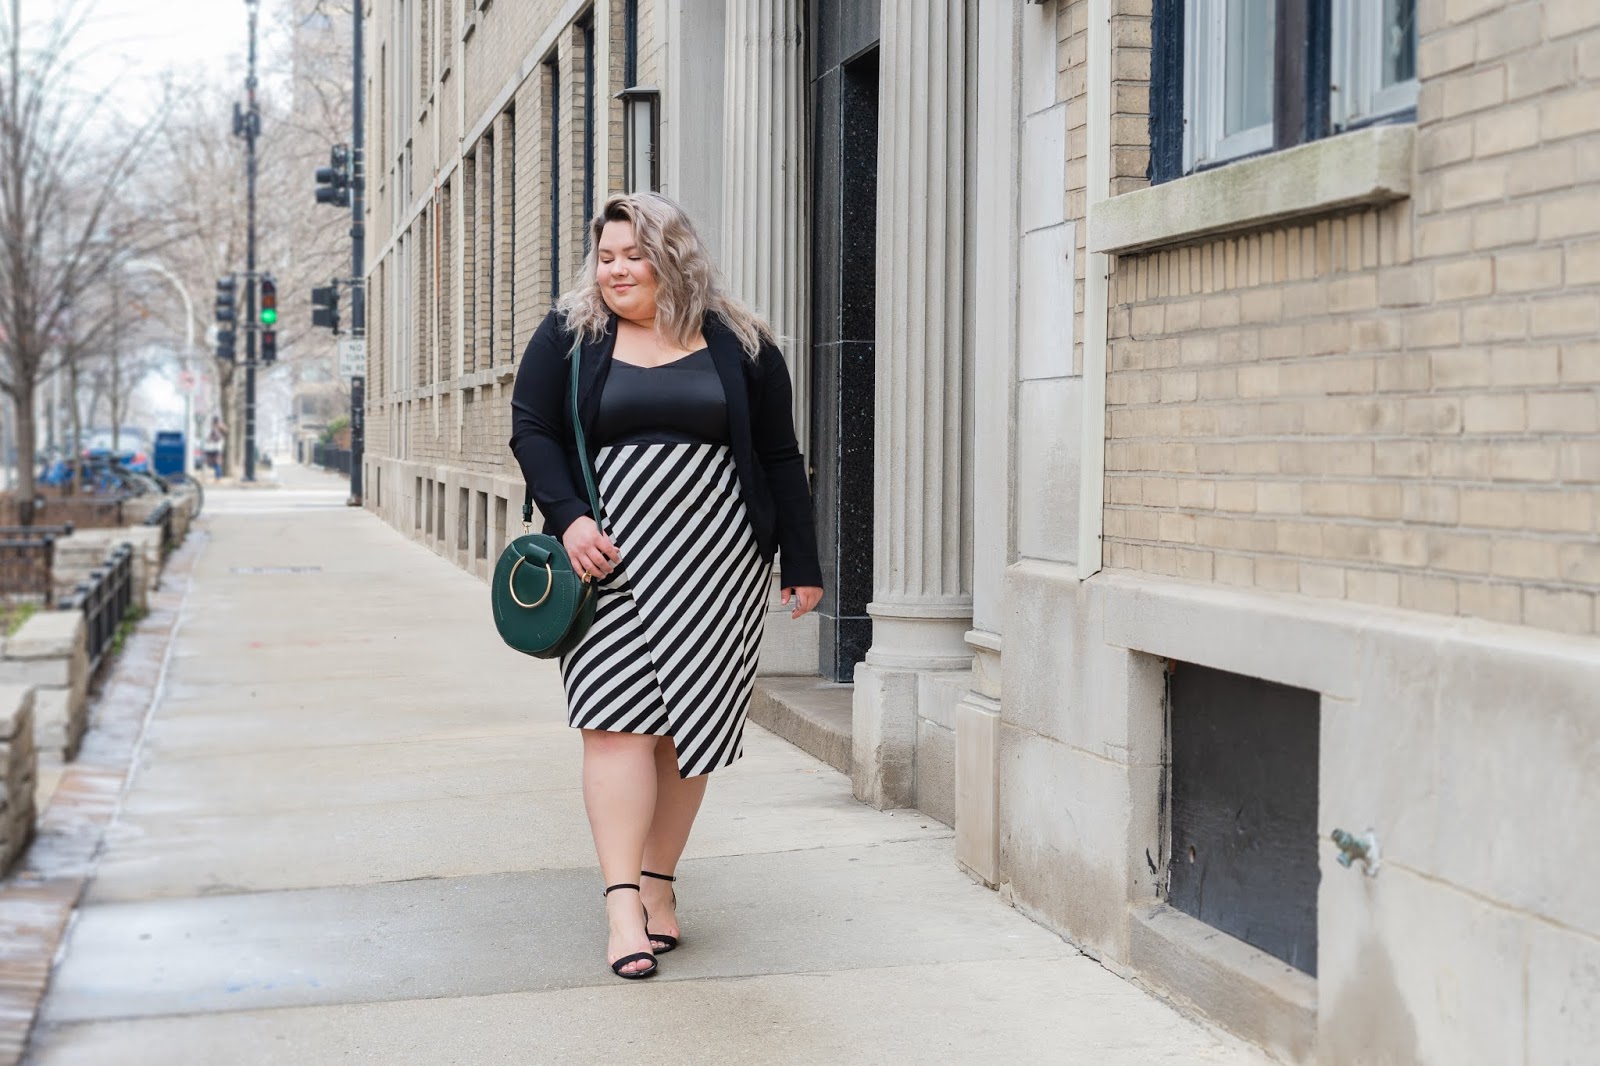 Chicago Plus Size Petite Fashion Blogger, YouTuber, and model Natalie Craig, of Natalie in the City, reviews Maree Pour Tai's plus size workwear.